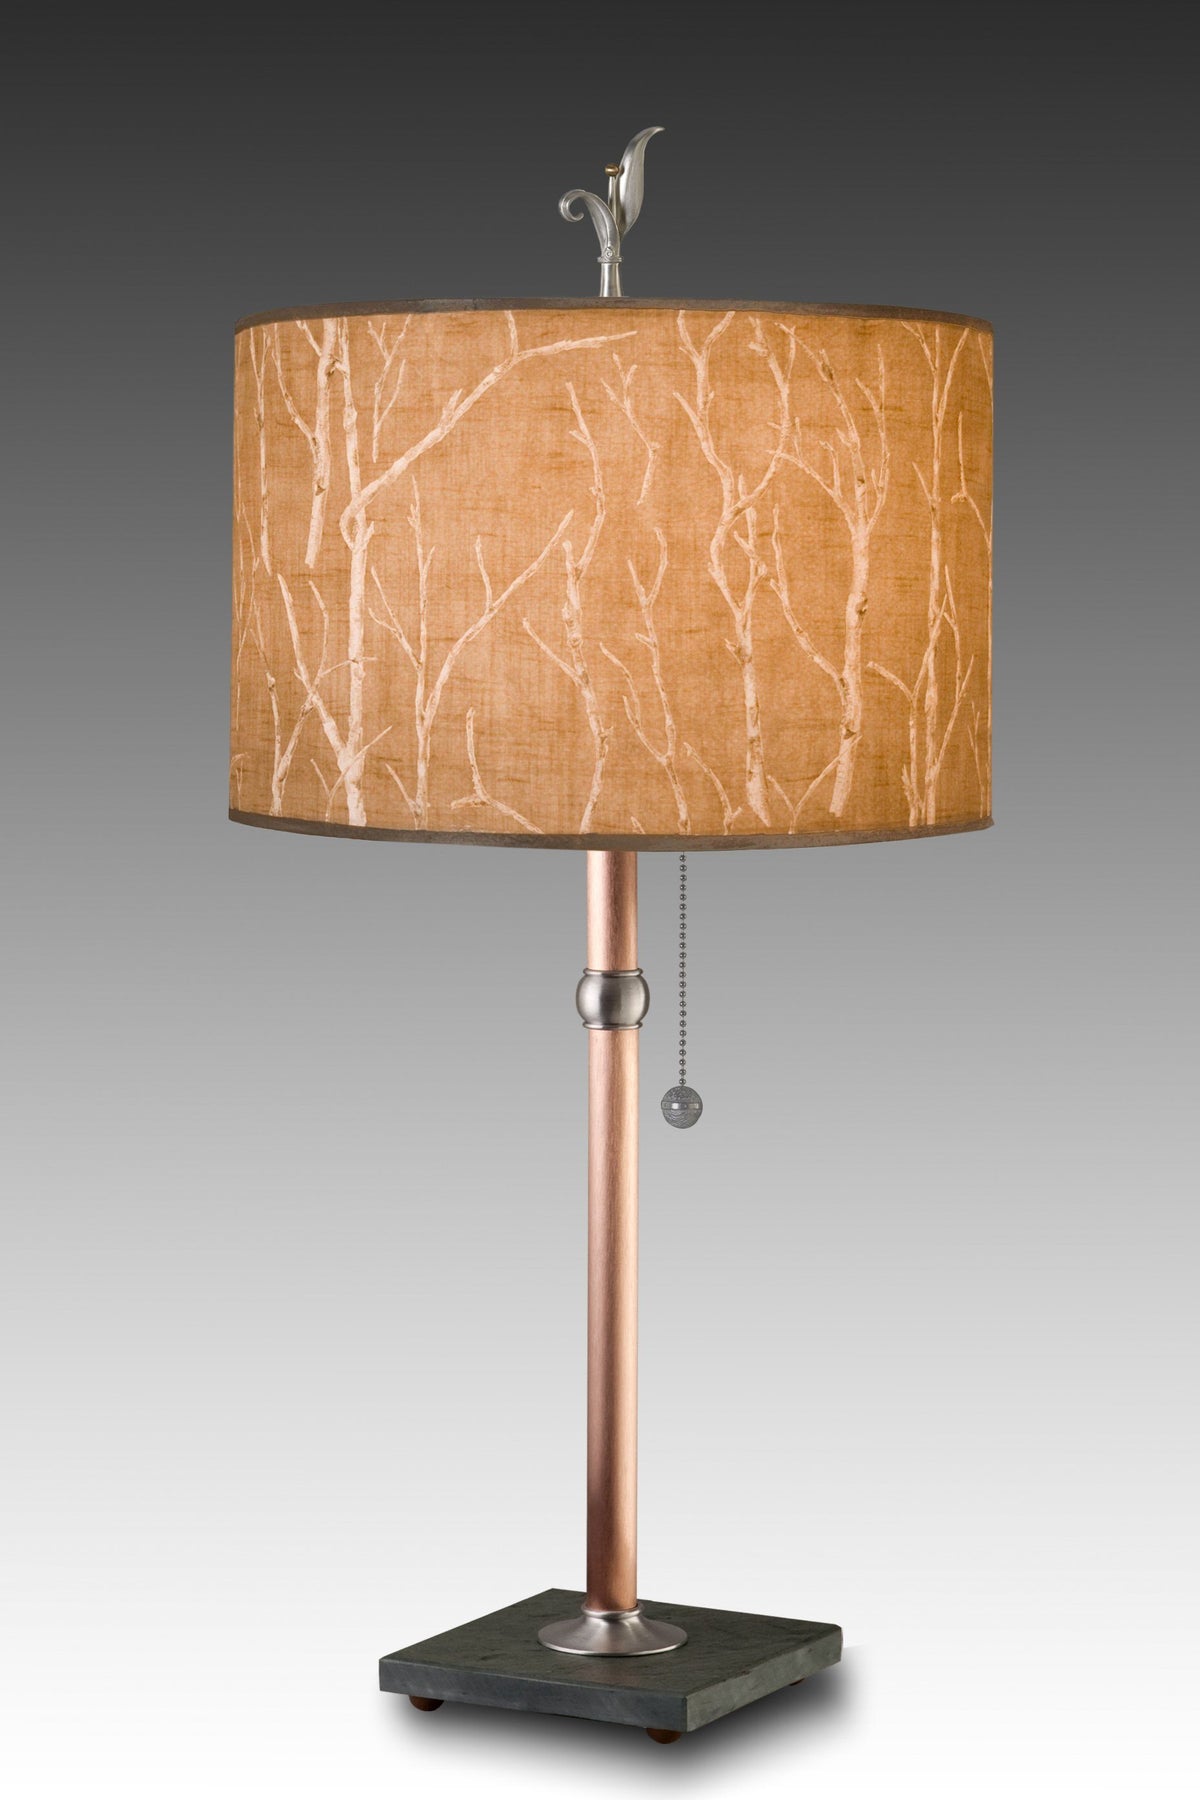 Janna Ugone &amp; Co Table Lamps Copper Table Lamp with Large Drum Shade in Twigs